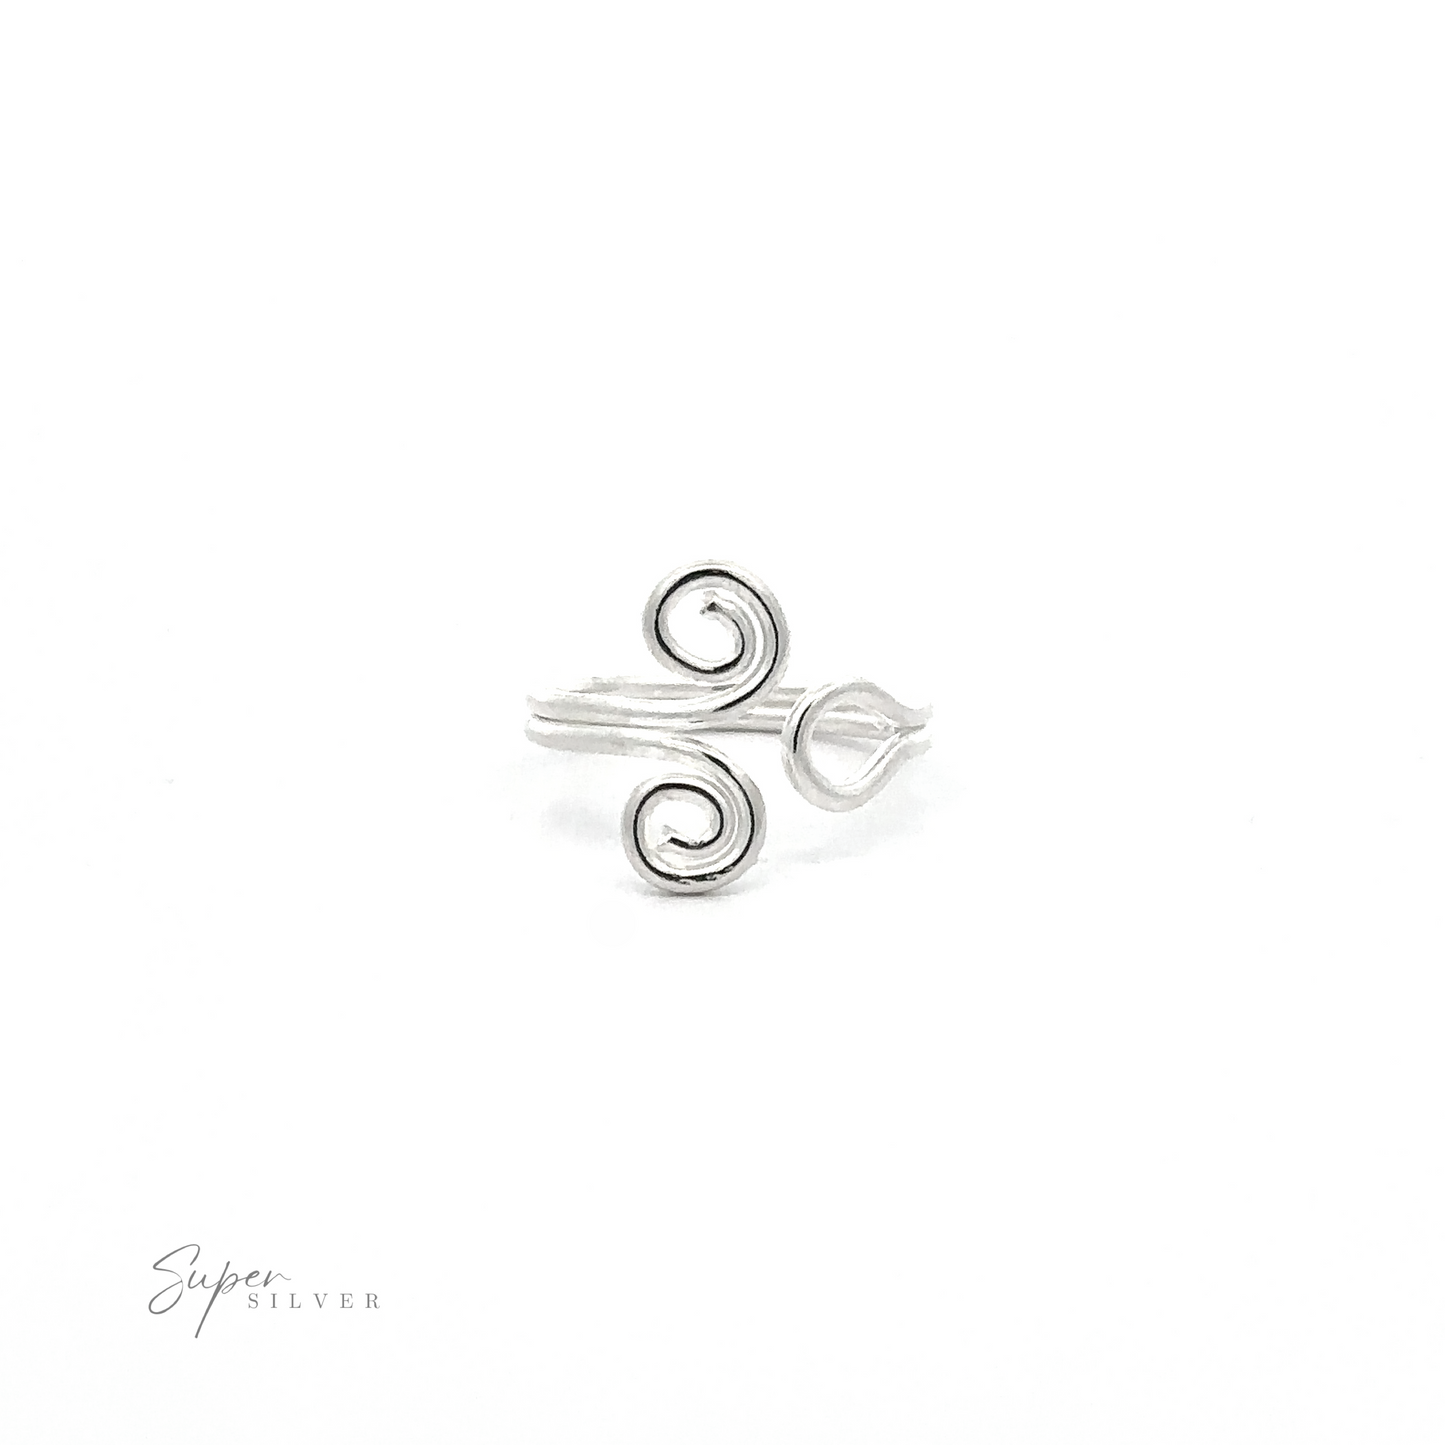 A Wire Spiral Swirl Adjustable Toe Ring with a minimalist, boho chic design, displayed on a plain white background.